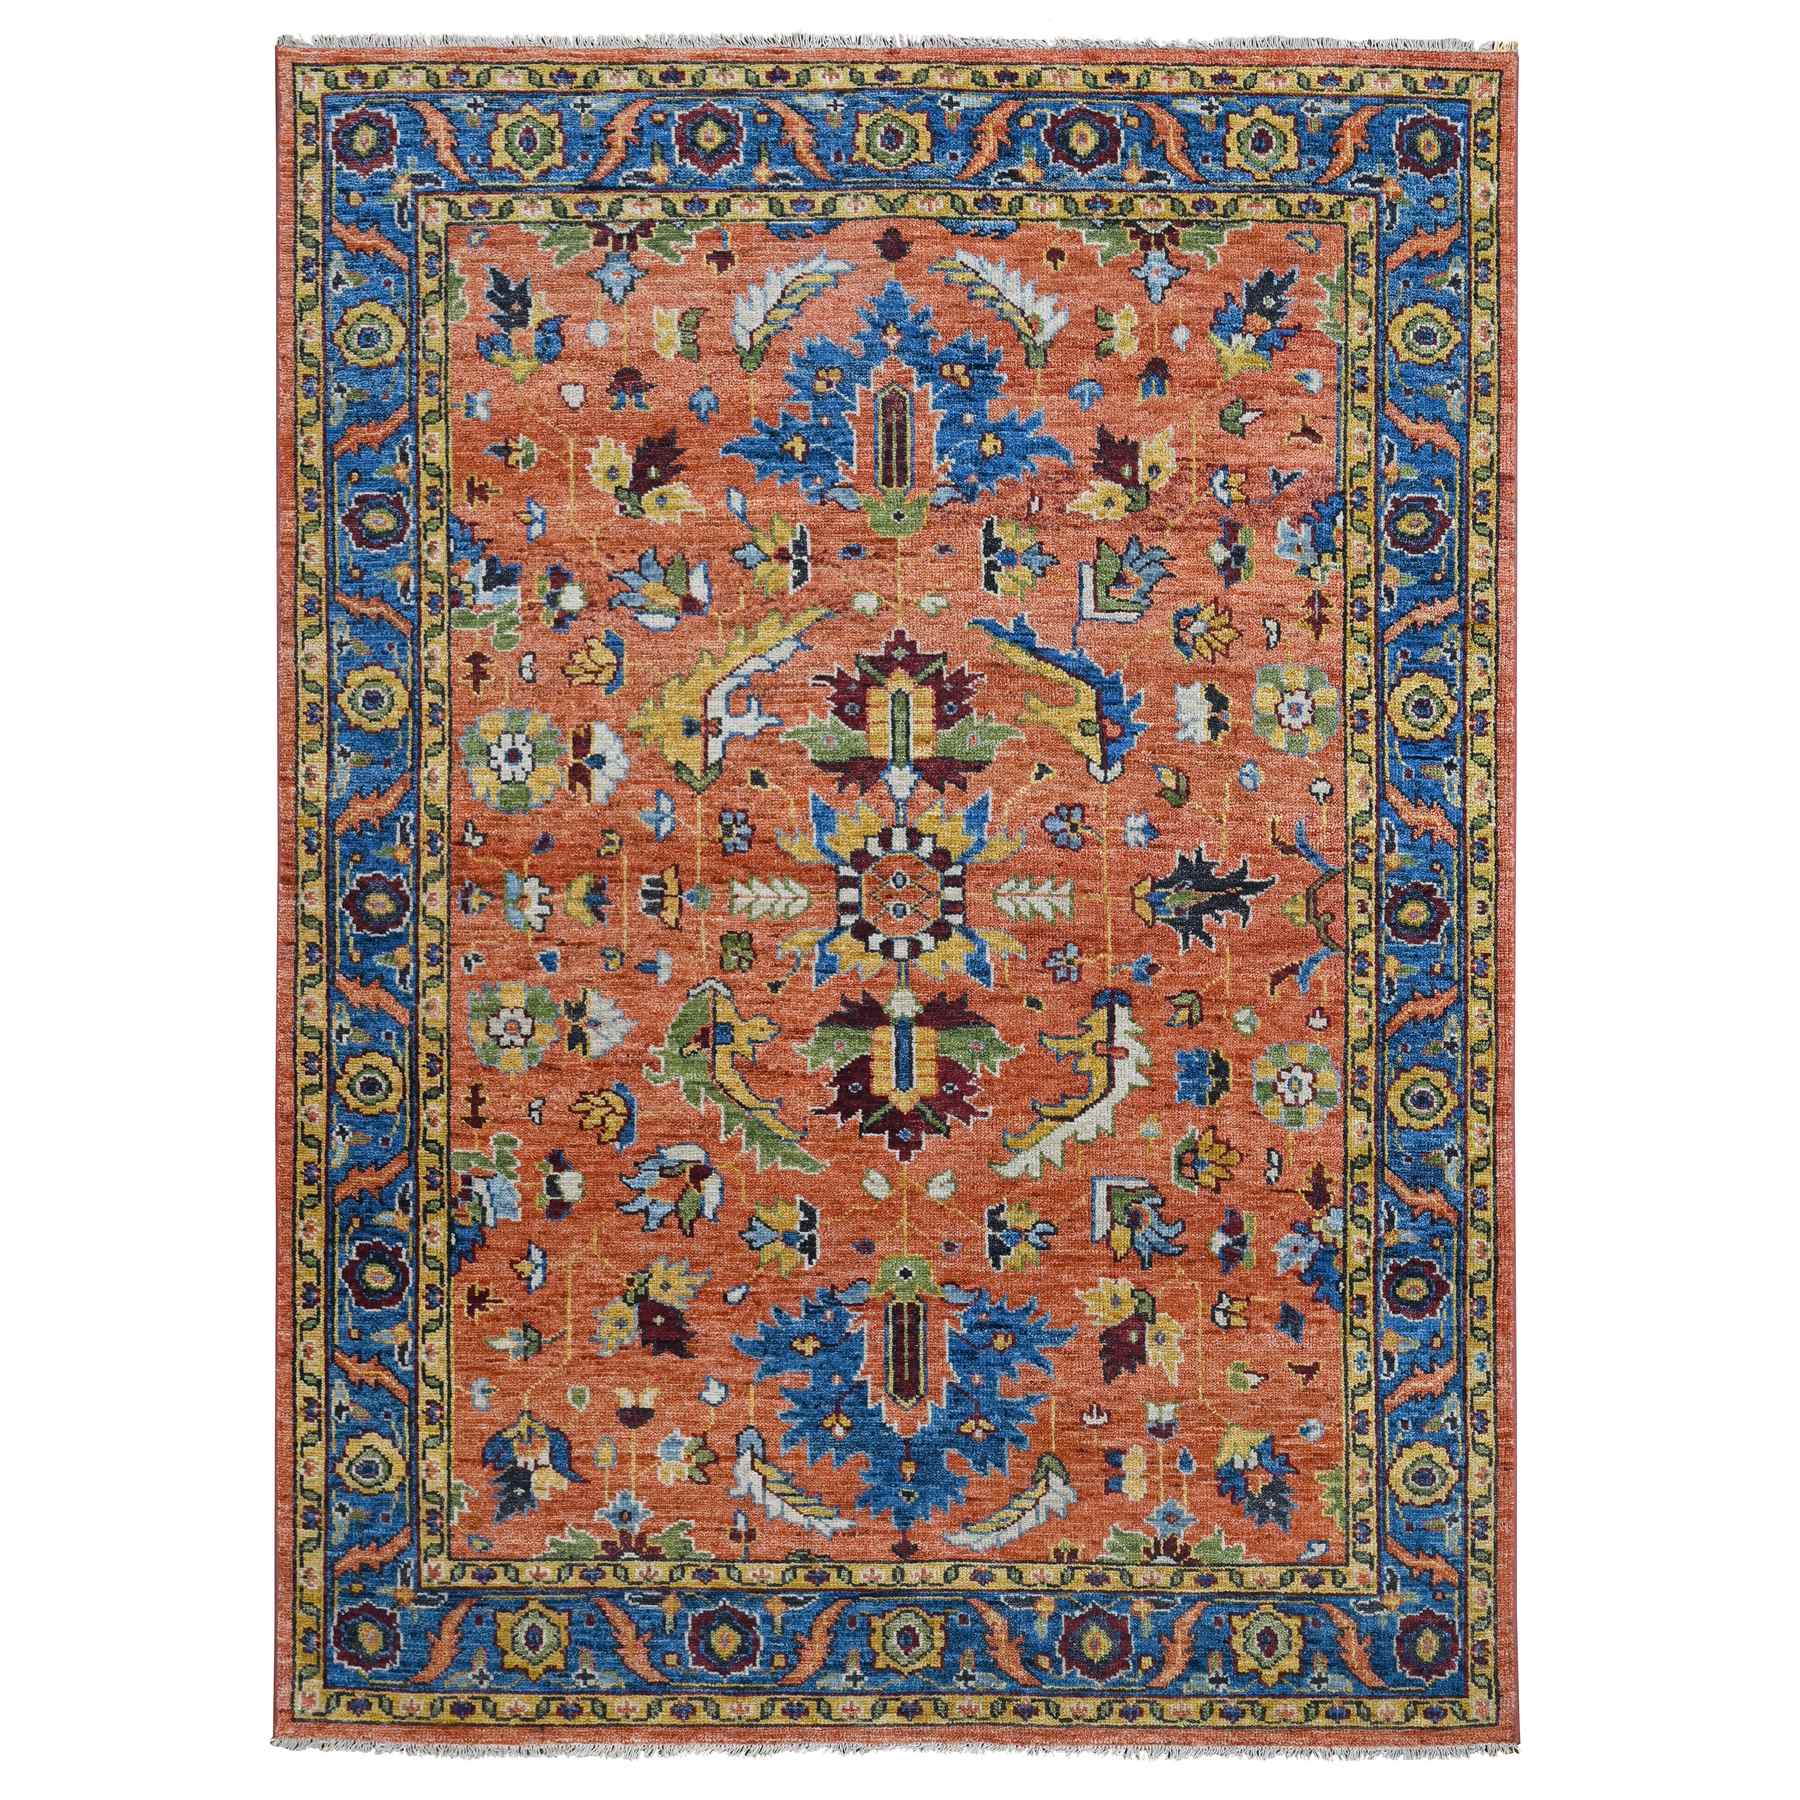  Wool Hand-Knotted Area Rug 9'2